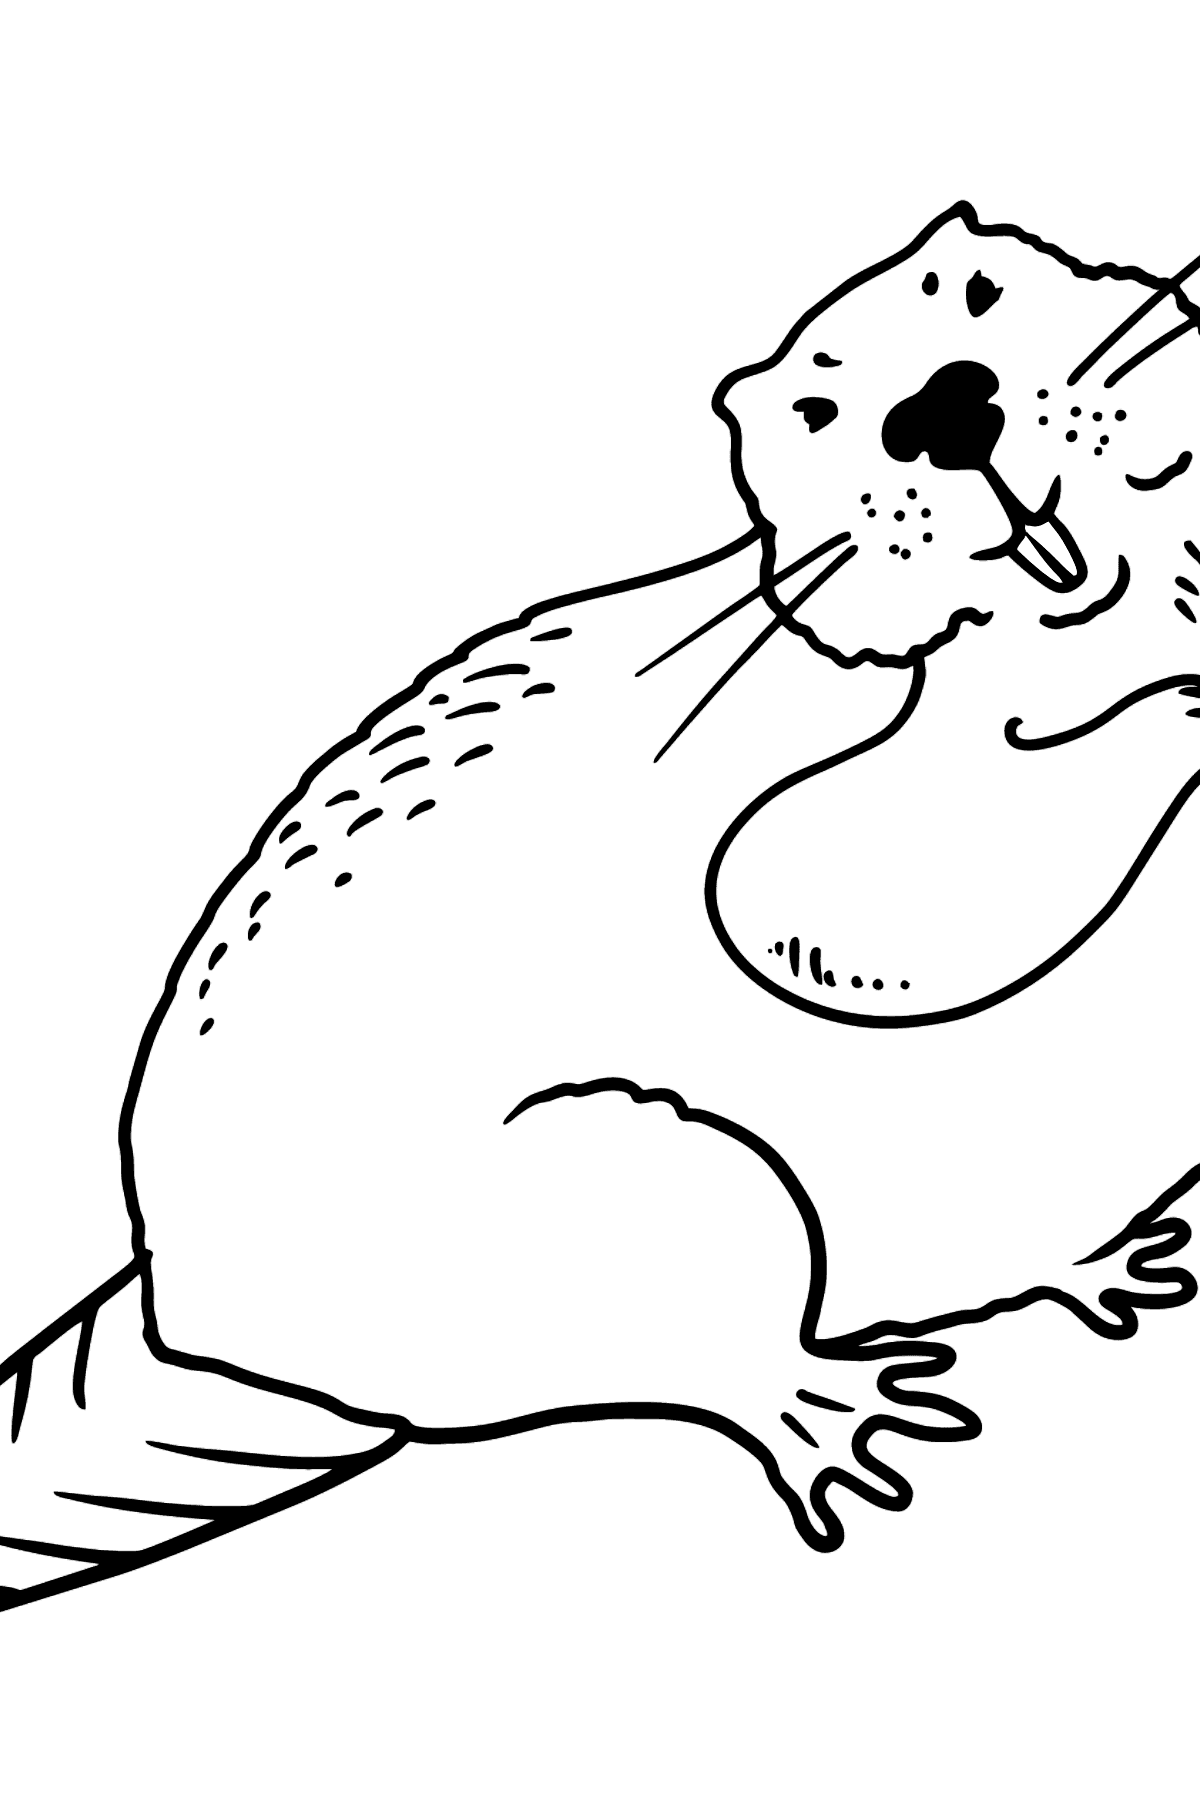 Beaver coloring page - Coloring Pages for Kids